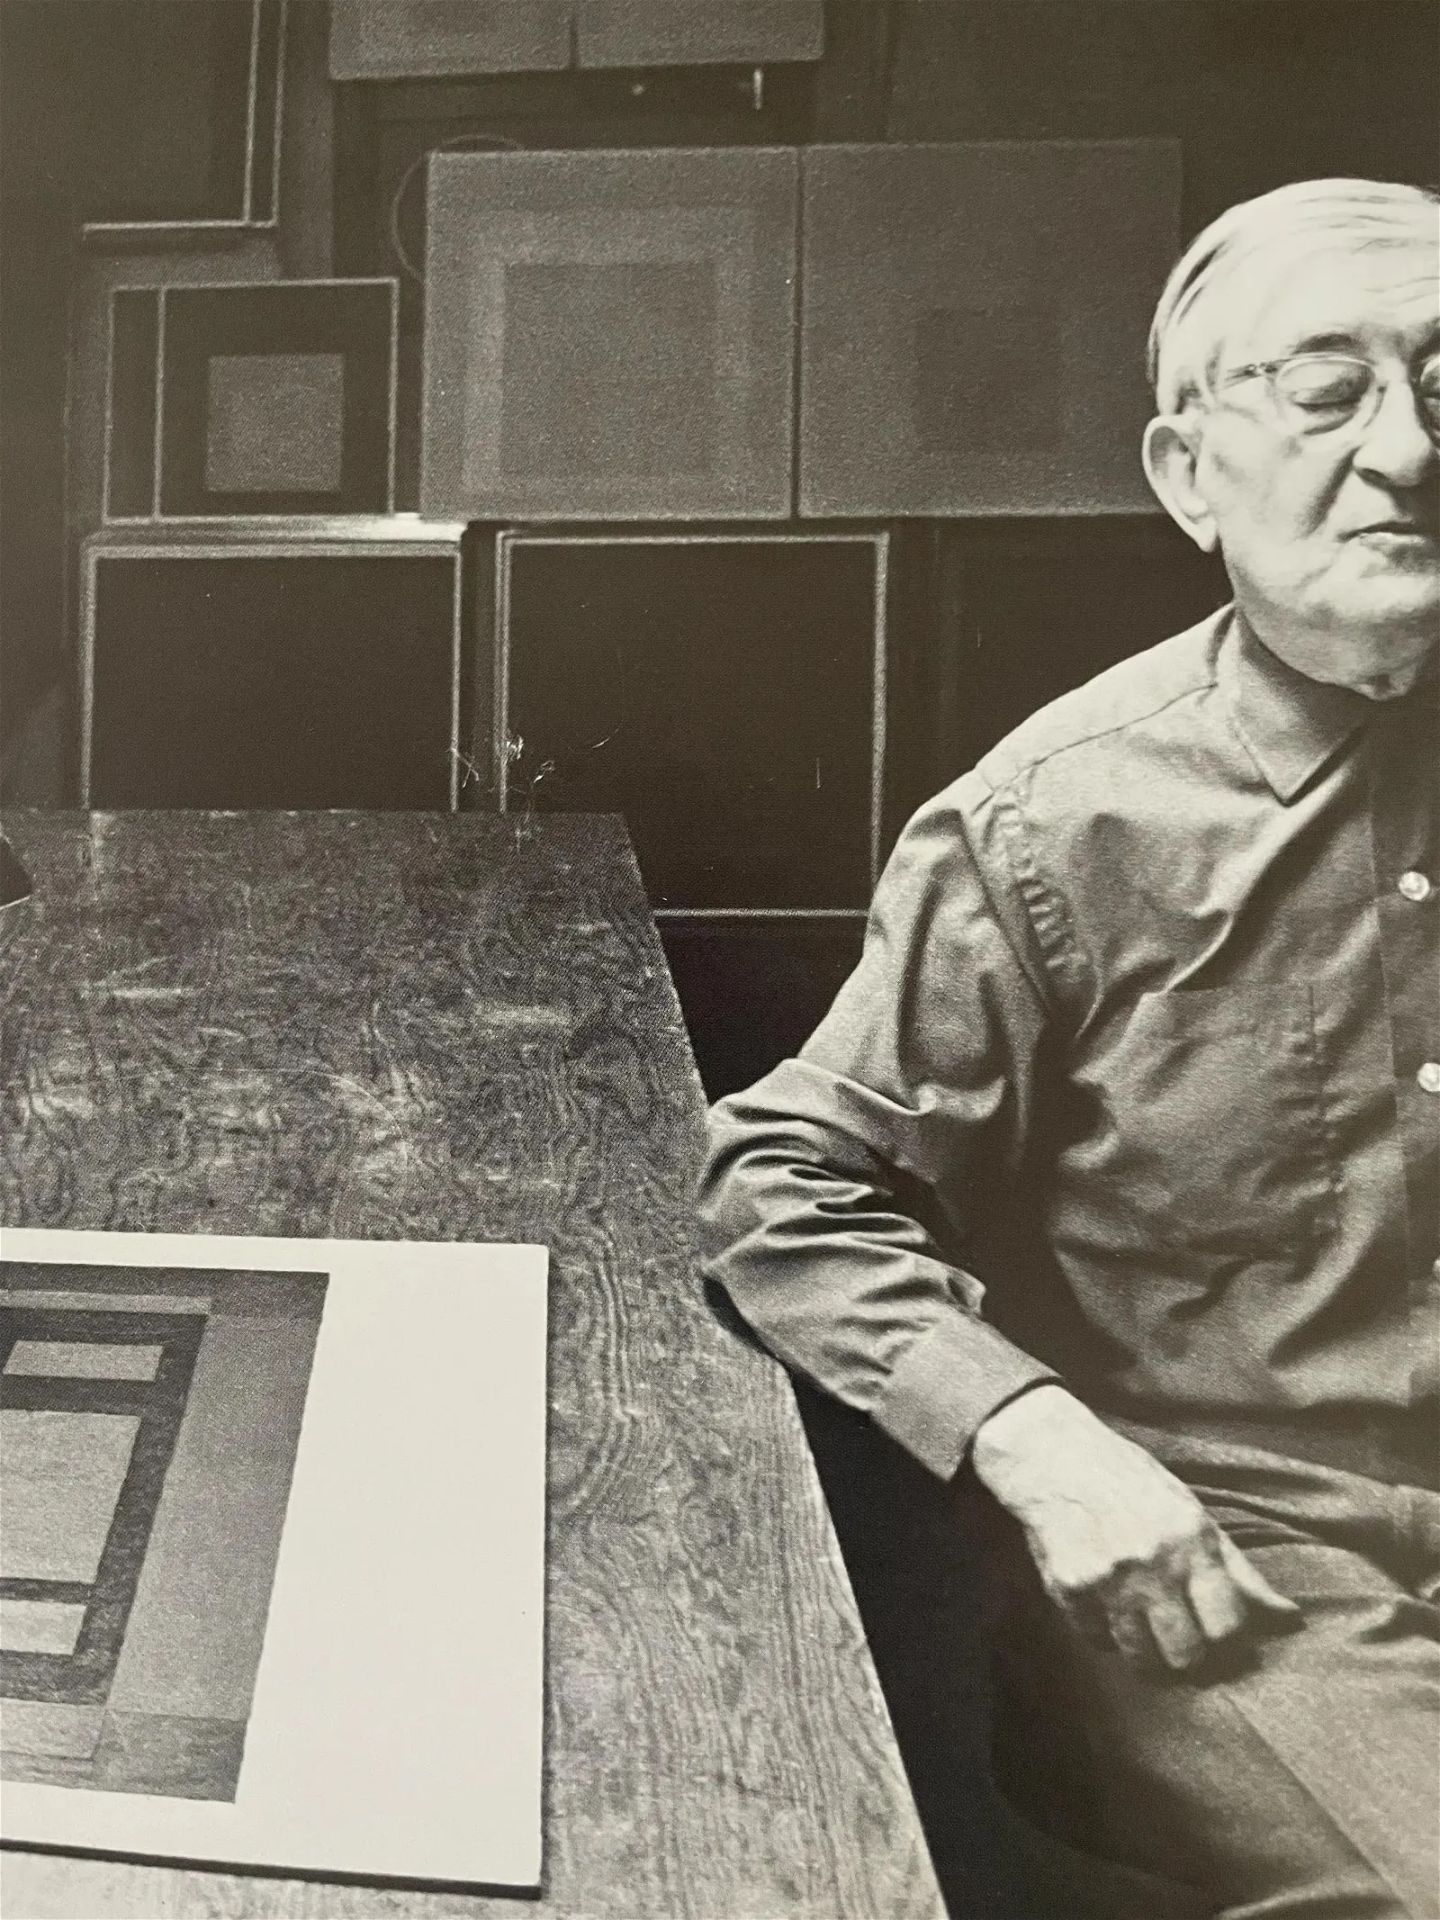 Hans Namuth "Josef Albers, New Haven, Connecticut, 1965" Print - Image 3 of 4